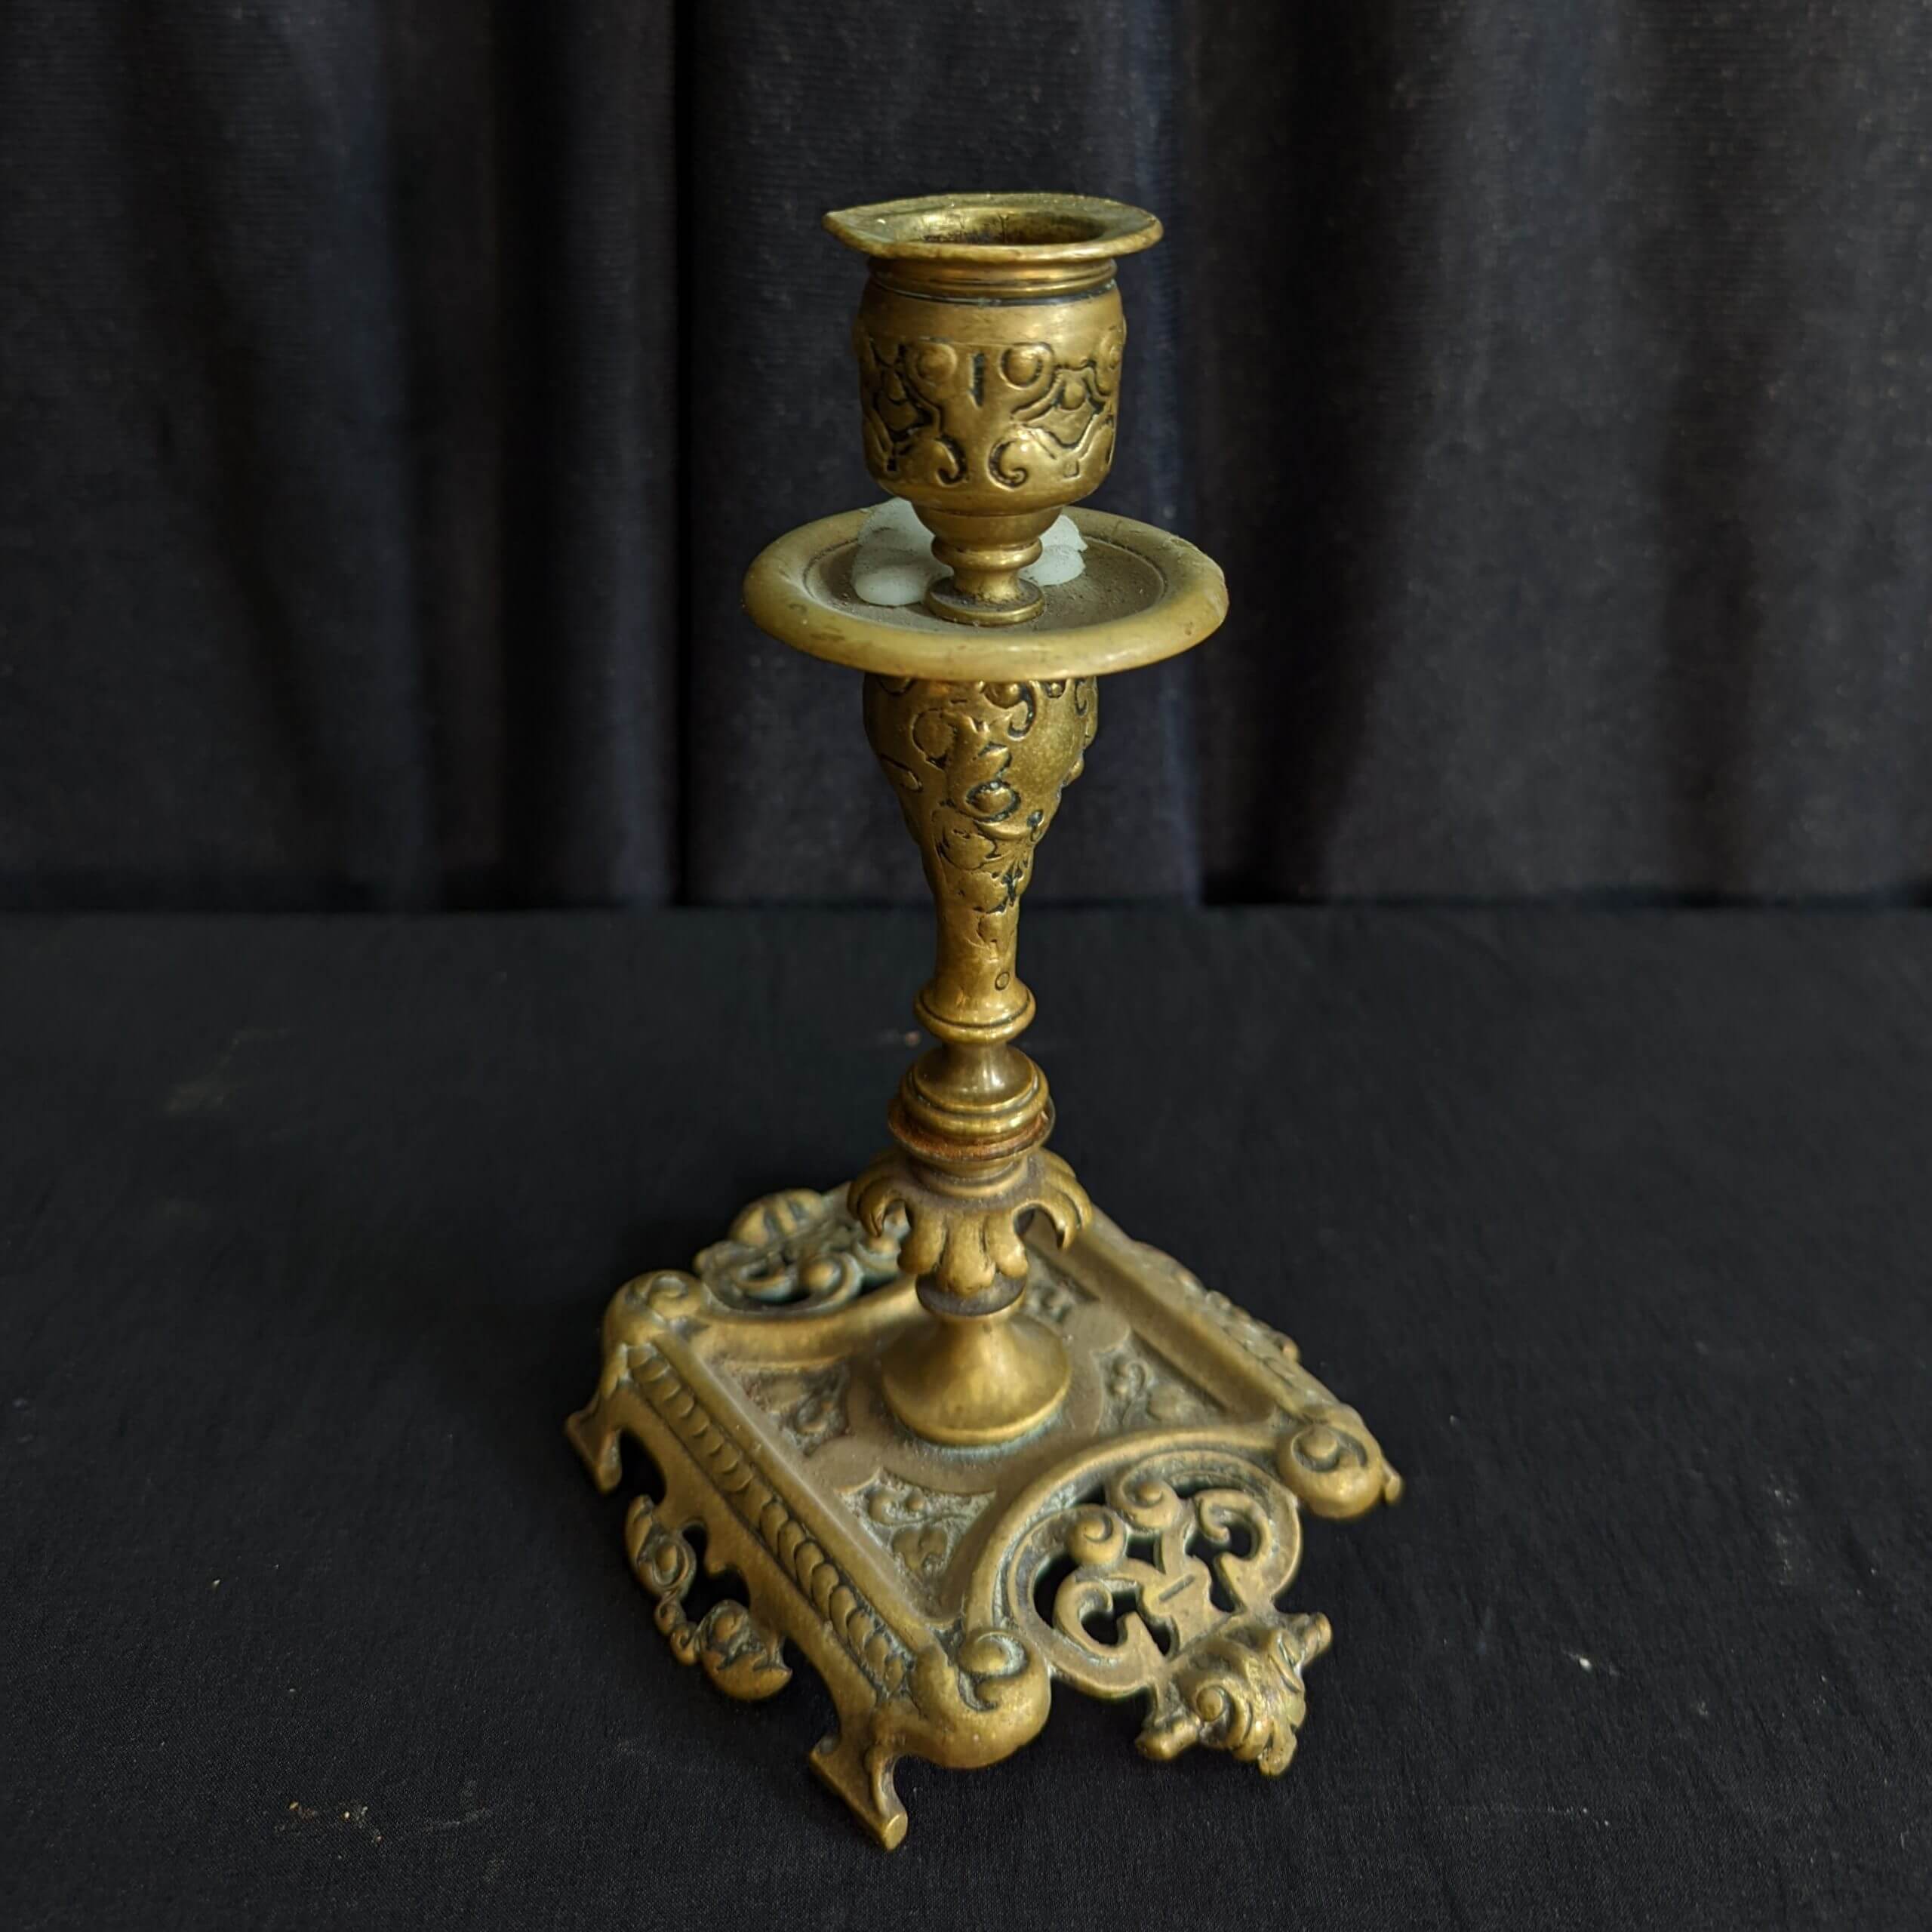 Highly Ornate & Decorative Antique Small Brass Baroque Style